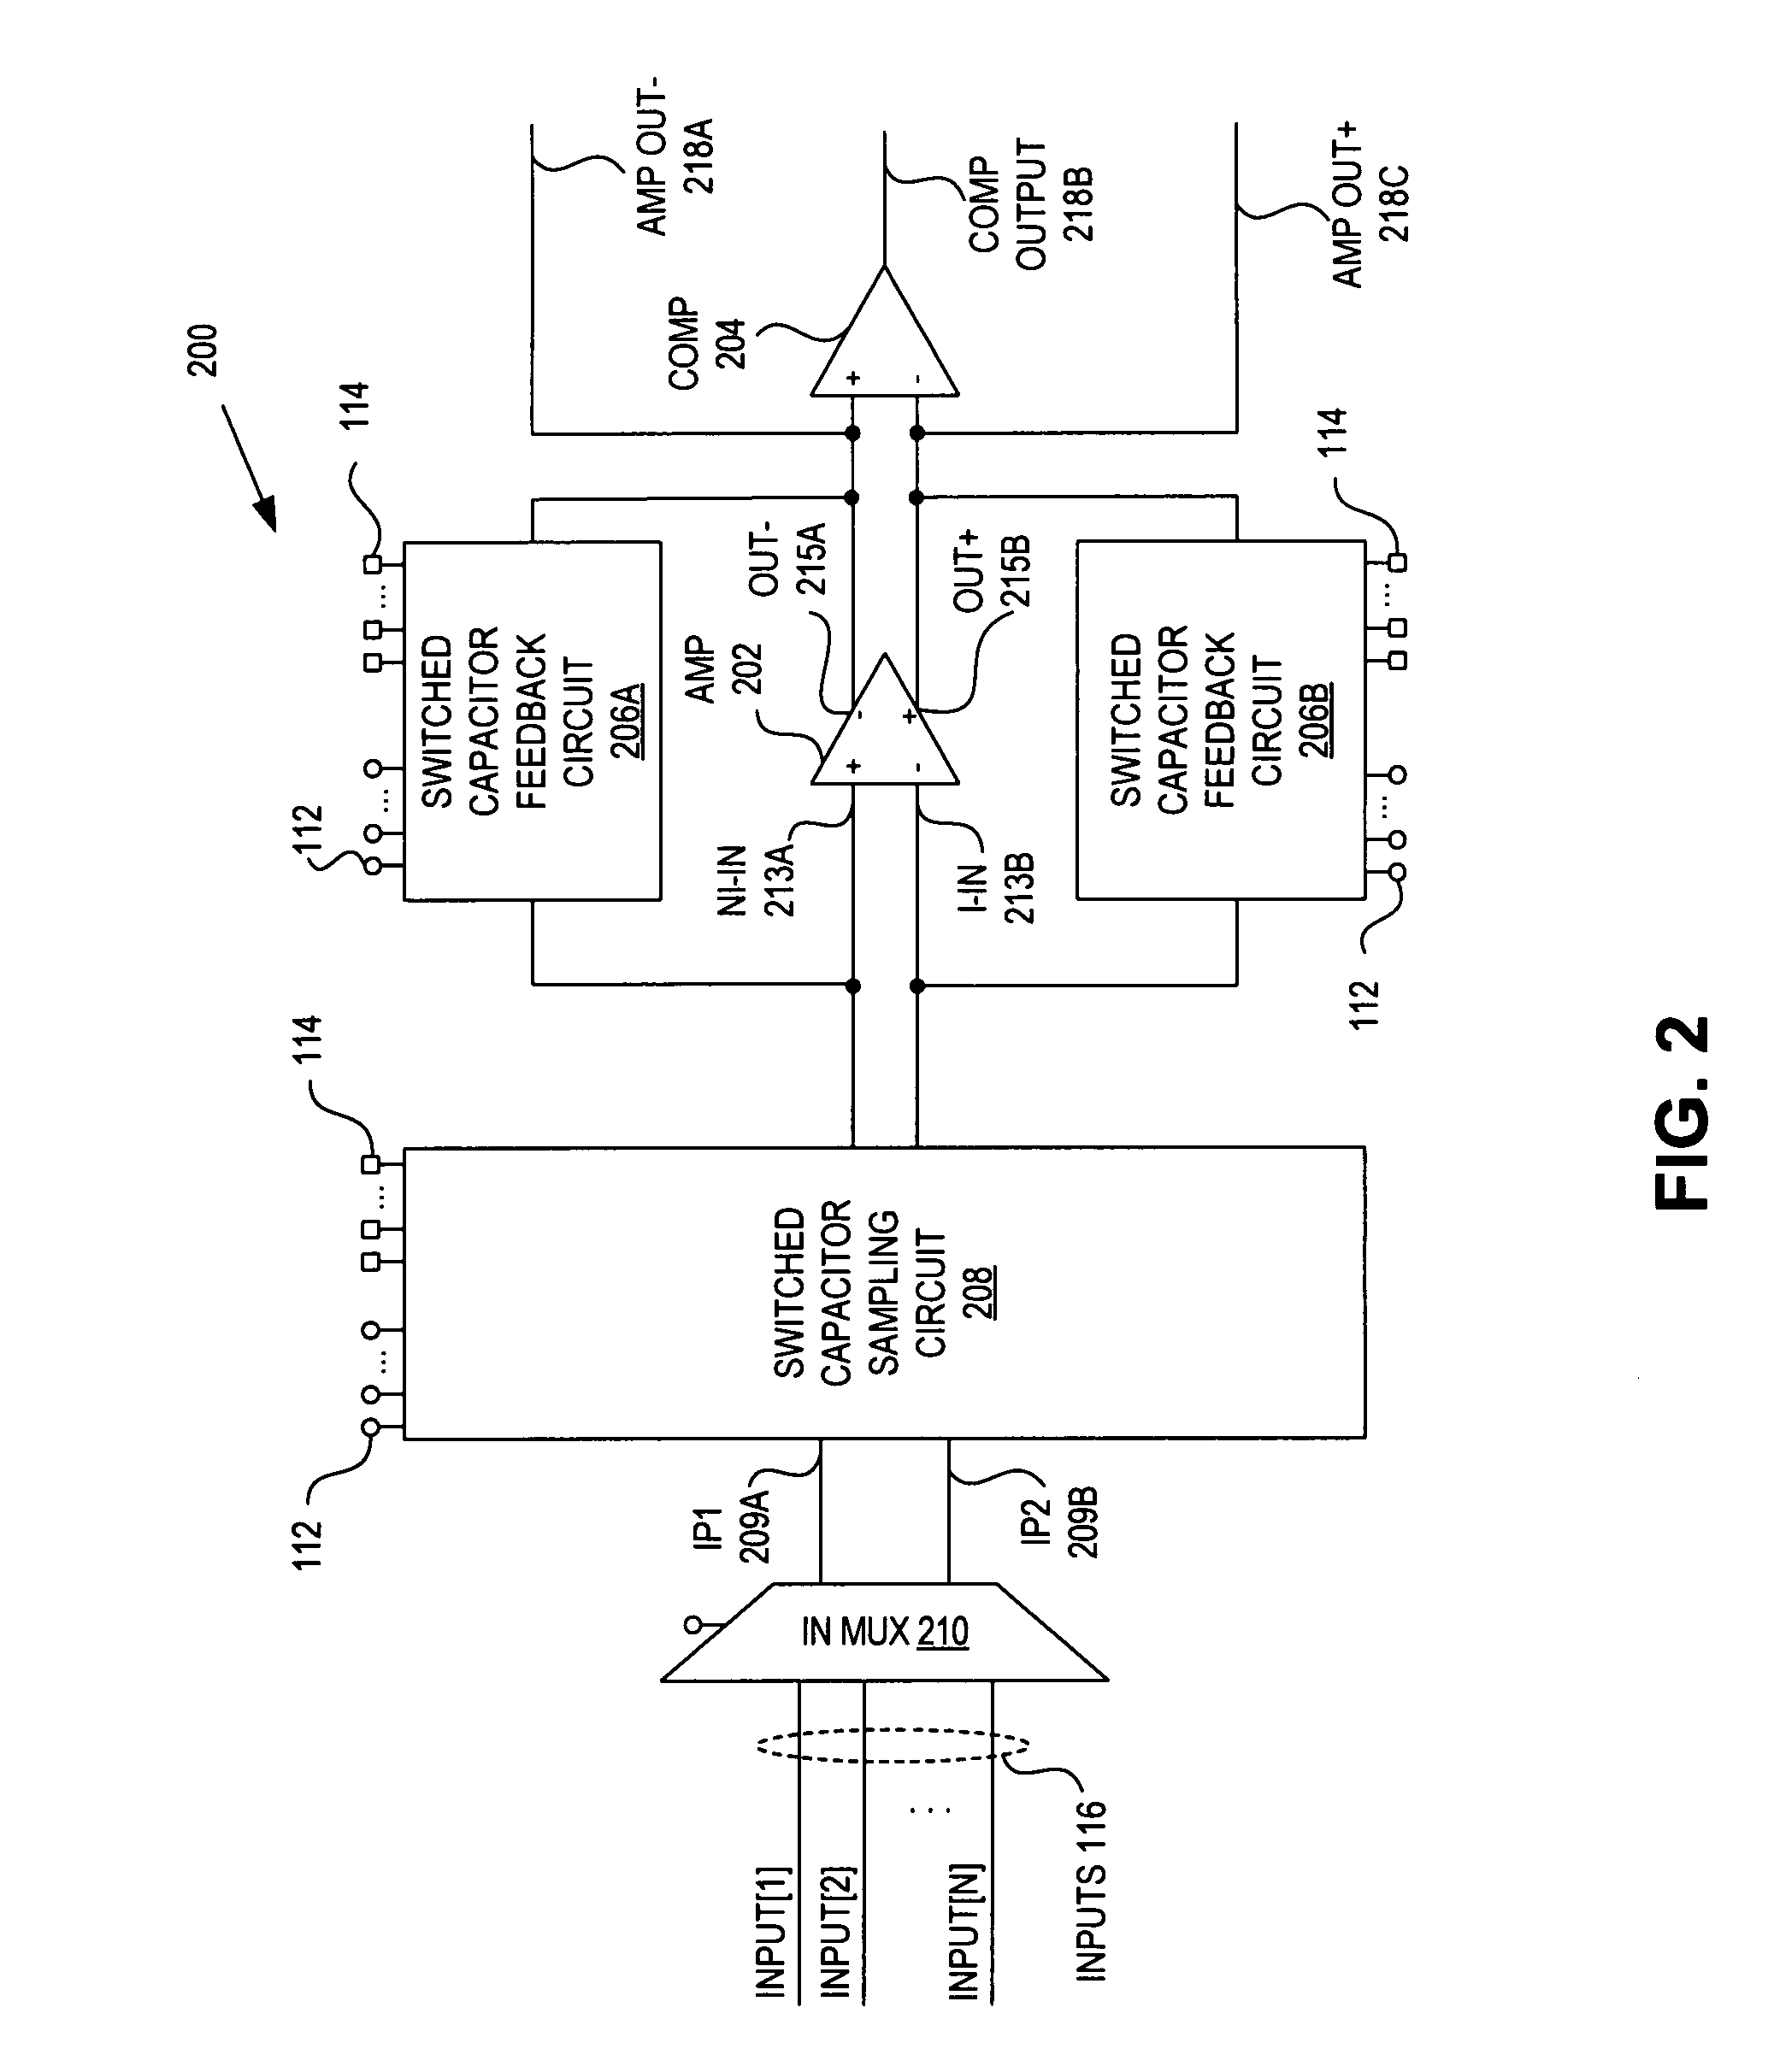 Configurable switched capacitor block